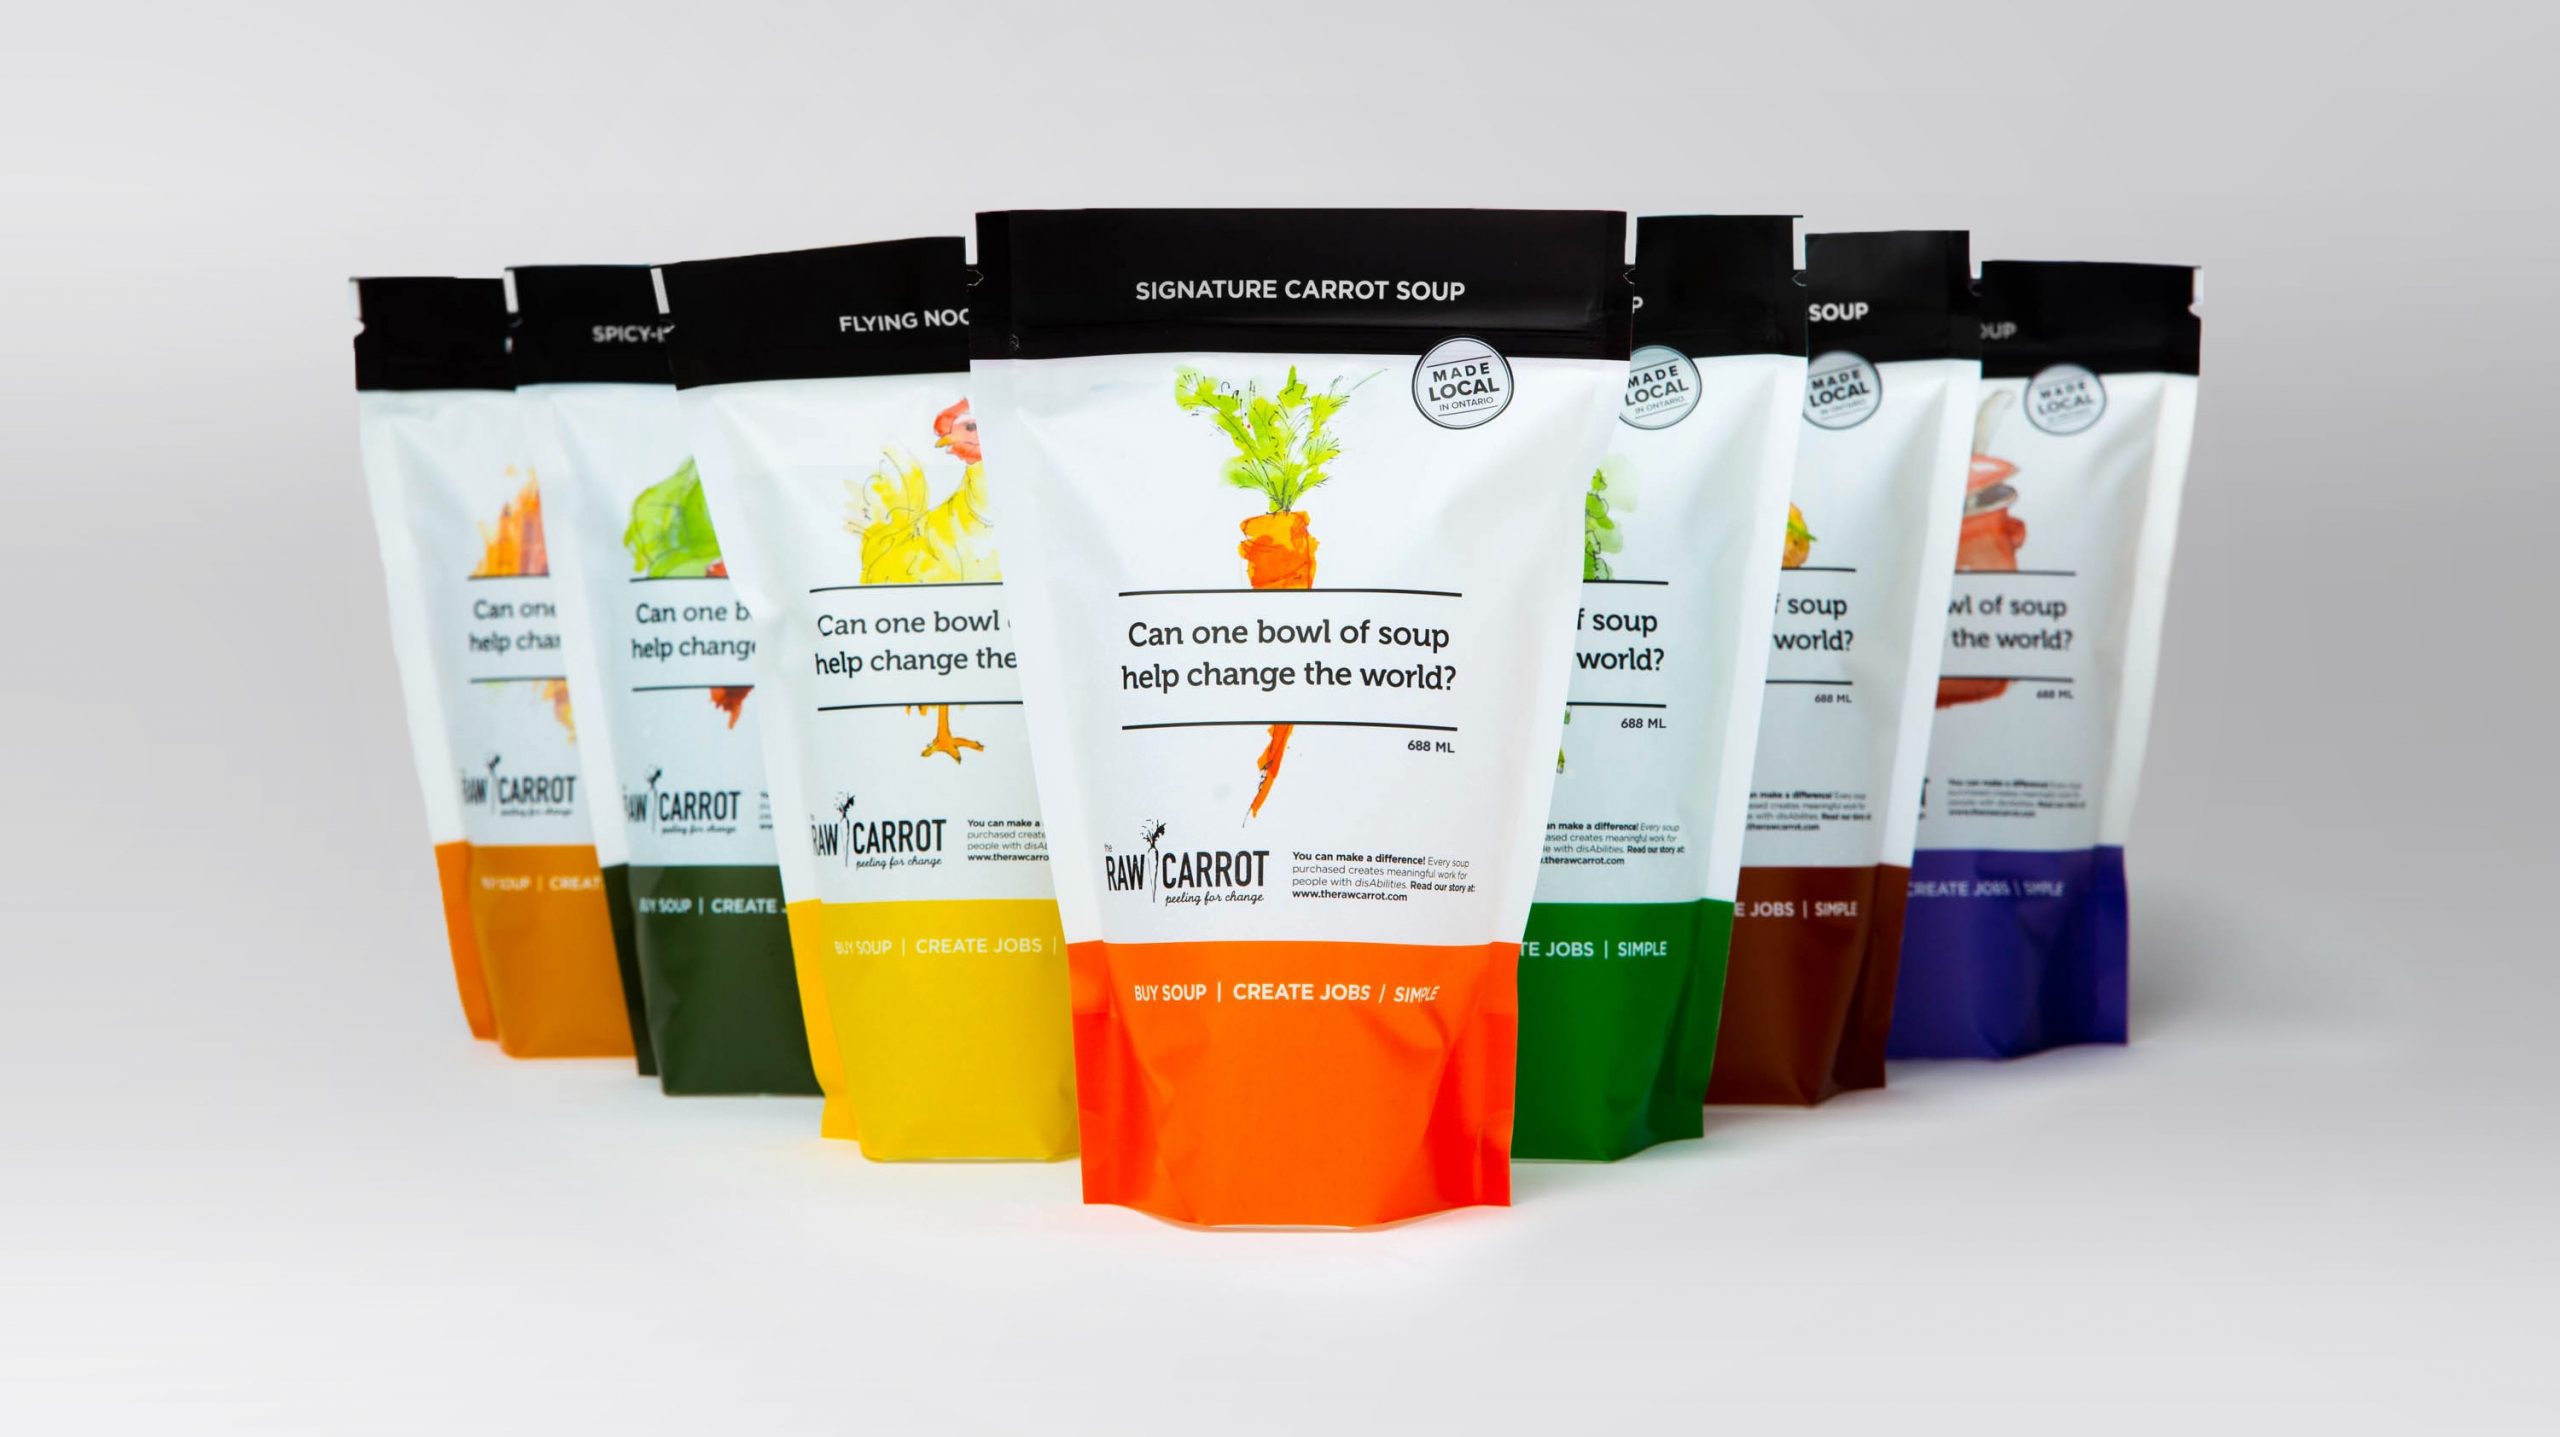 Seven product images of different soup flavors in a line.